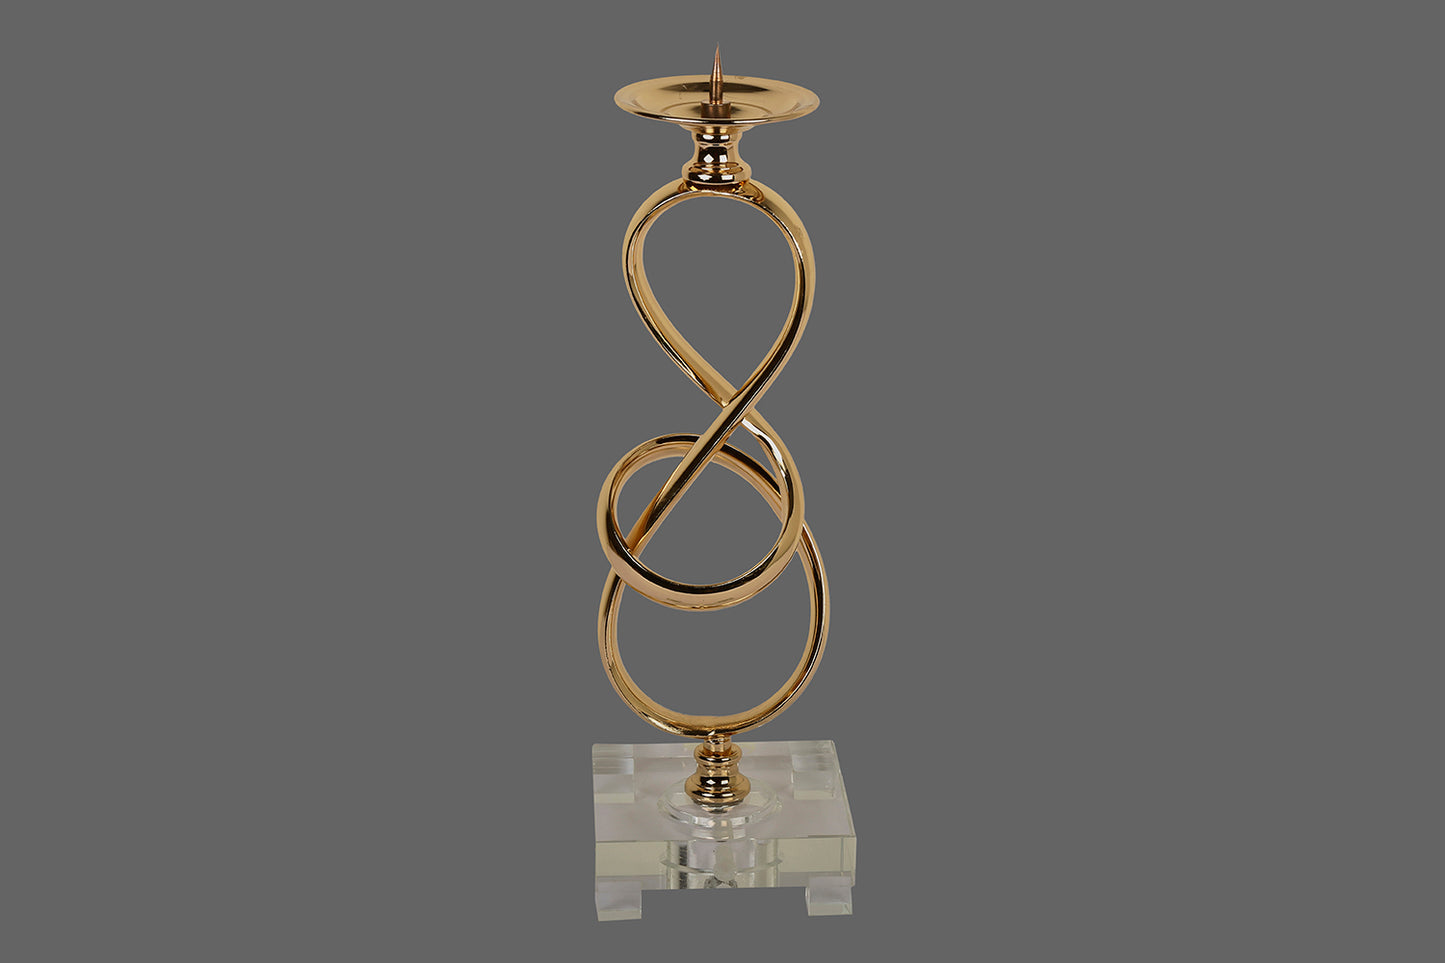 A Metallic Candle stand, with a chrome gold finish and in shape of a knot.